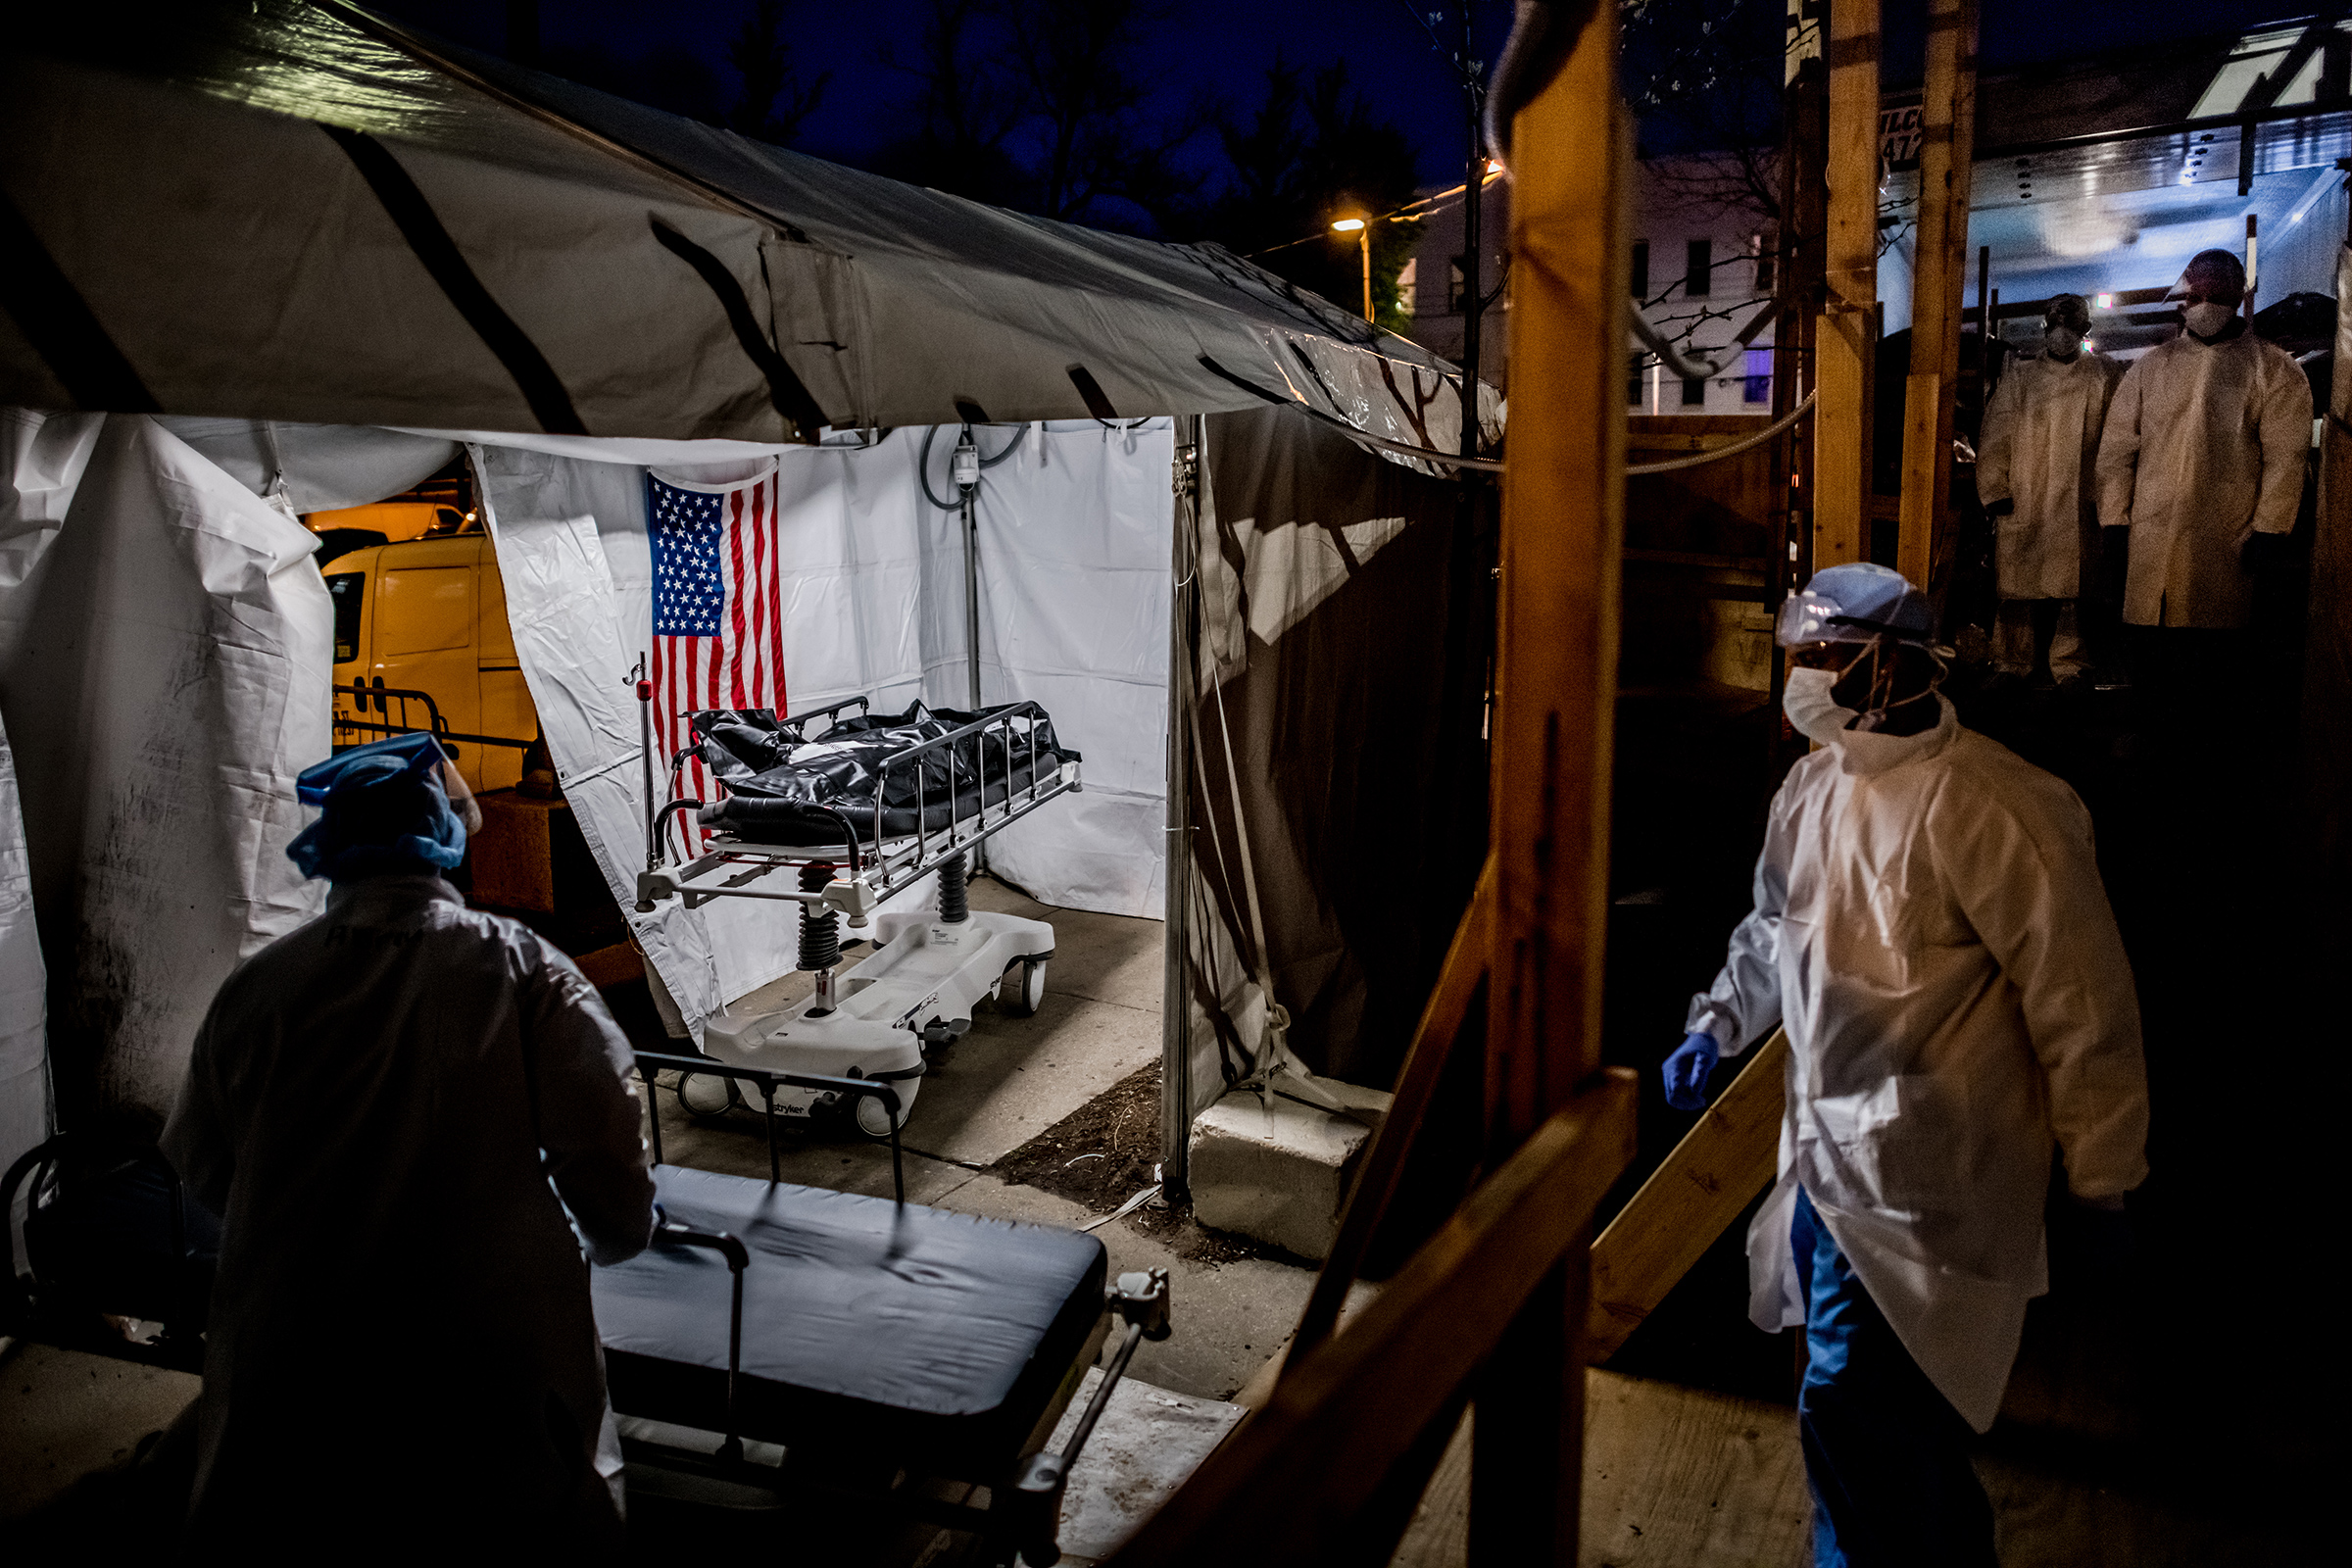 The transport team moves the body bags of deceased COVID-19 patients from the overflowing morgue of Brooklyn's <a href="https://time.com/wyckoff-hospital-brooklyn-coronavirus/" target="_blank" rel="noopener noreferrer">Wyckoff Heights Medical Center</a> into the improvised morgue set up outside on April 27. Three refrigerated semitrailers, capable of holding more than 150 bodies between them, were brought in as an emergency solution during the height of the pandemic. The transports often occurred at night to avoid upsetting neighbors of the hospital. (Meridith Kohut for TIME)